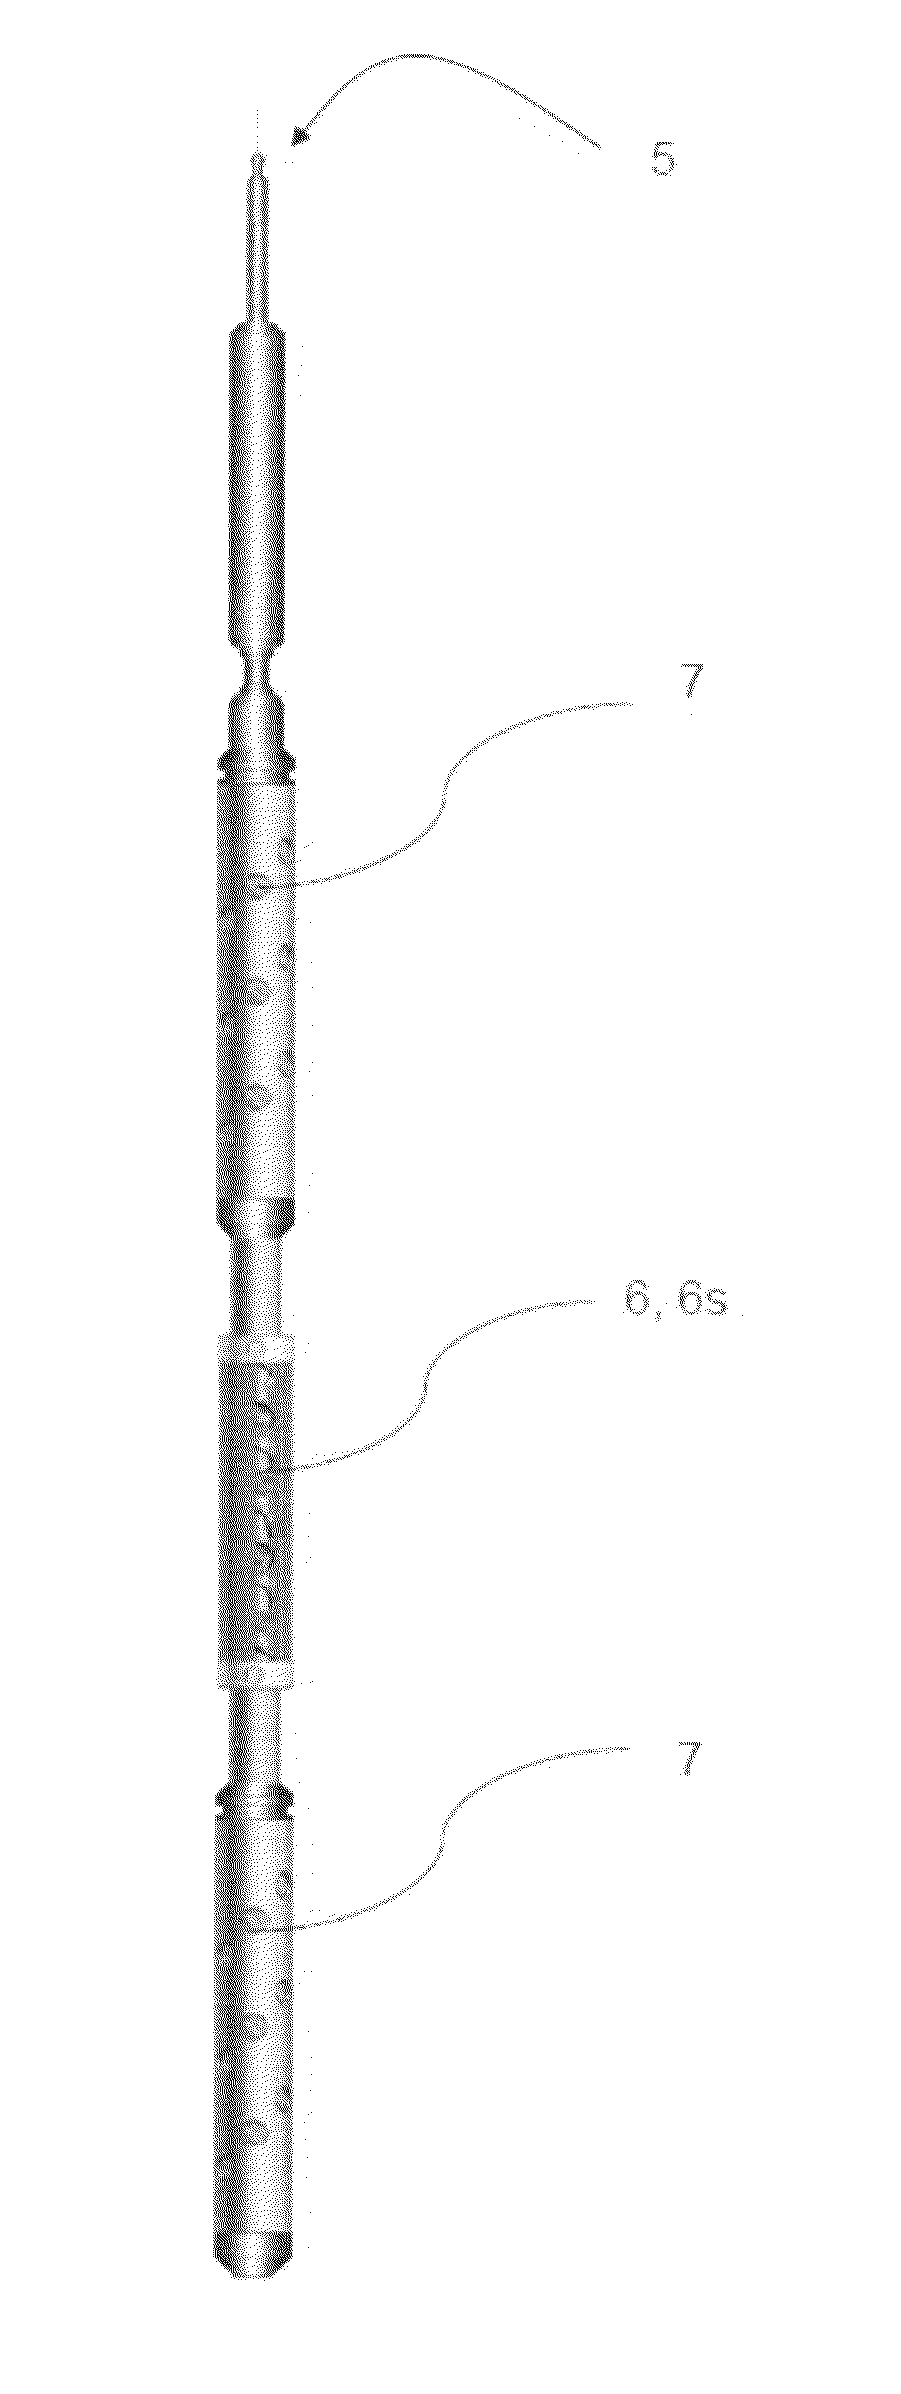 Method and Apparatus for Perforating a Casing and Producing Hydrocarbons